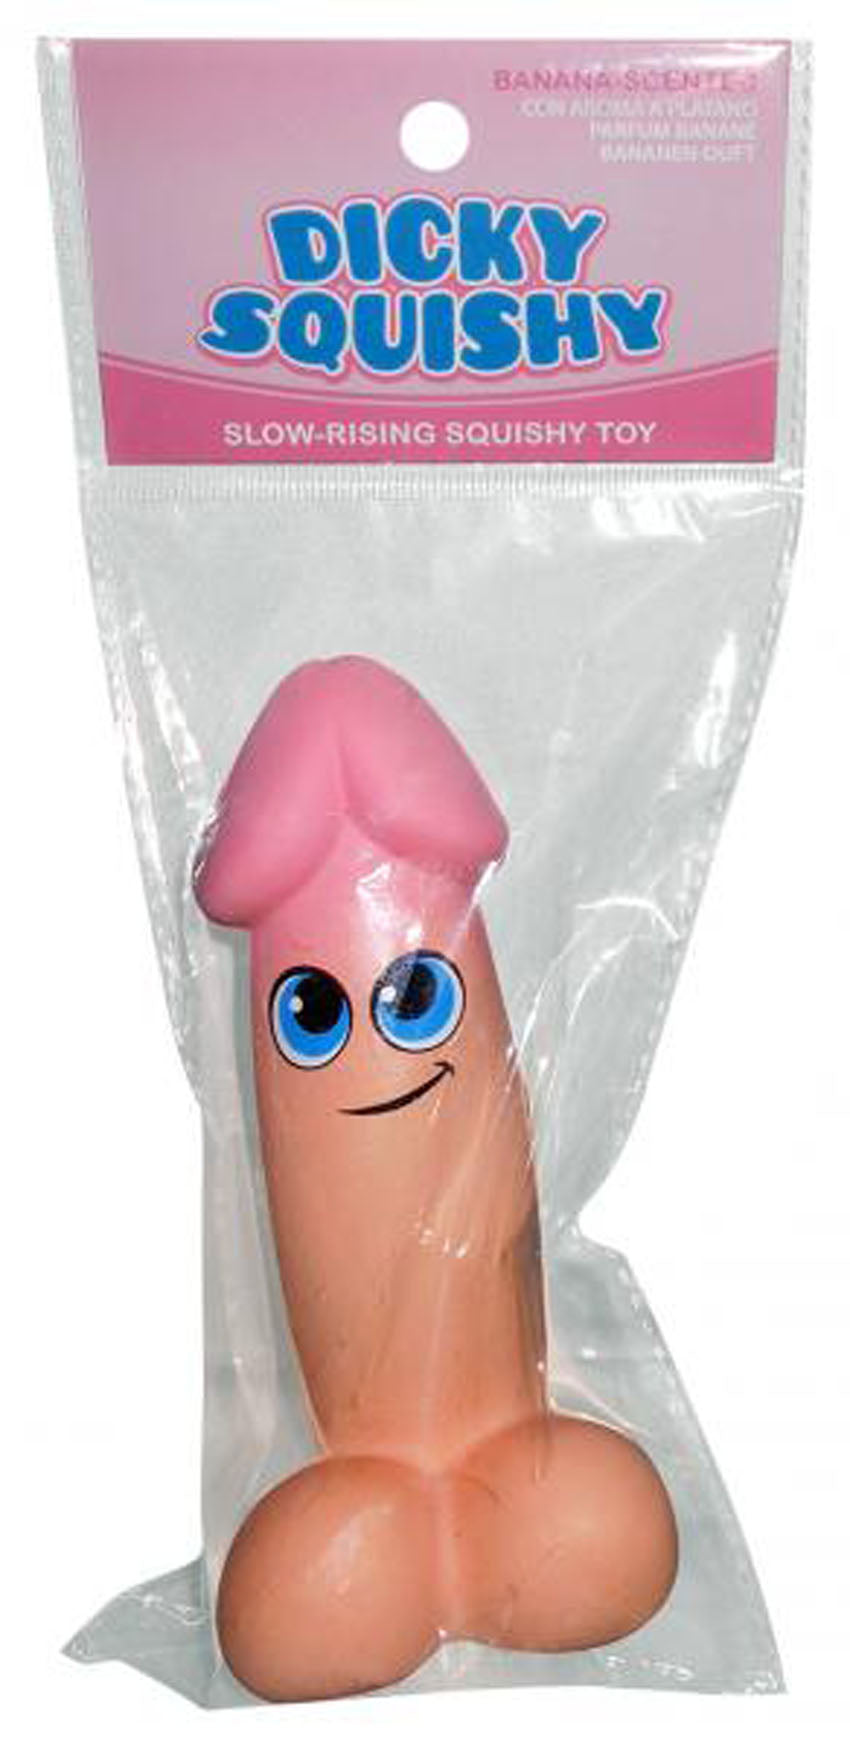 Dick Squishy 5.5 Inches - Banana Scented KG-NV090